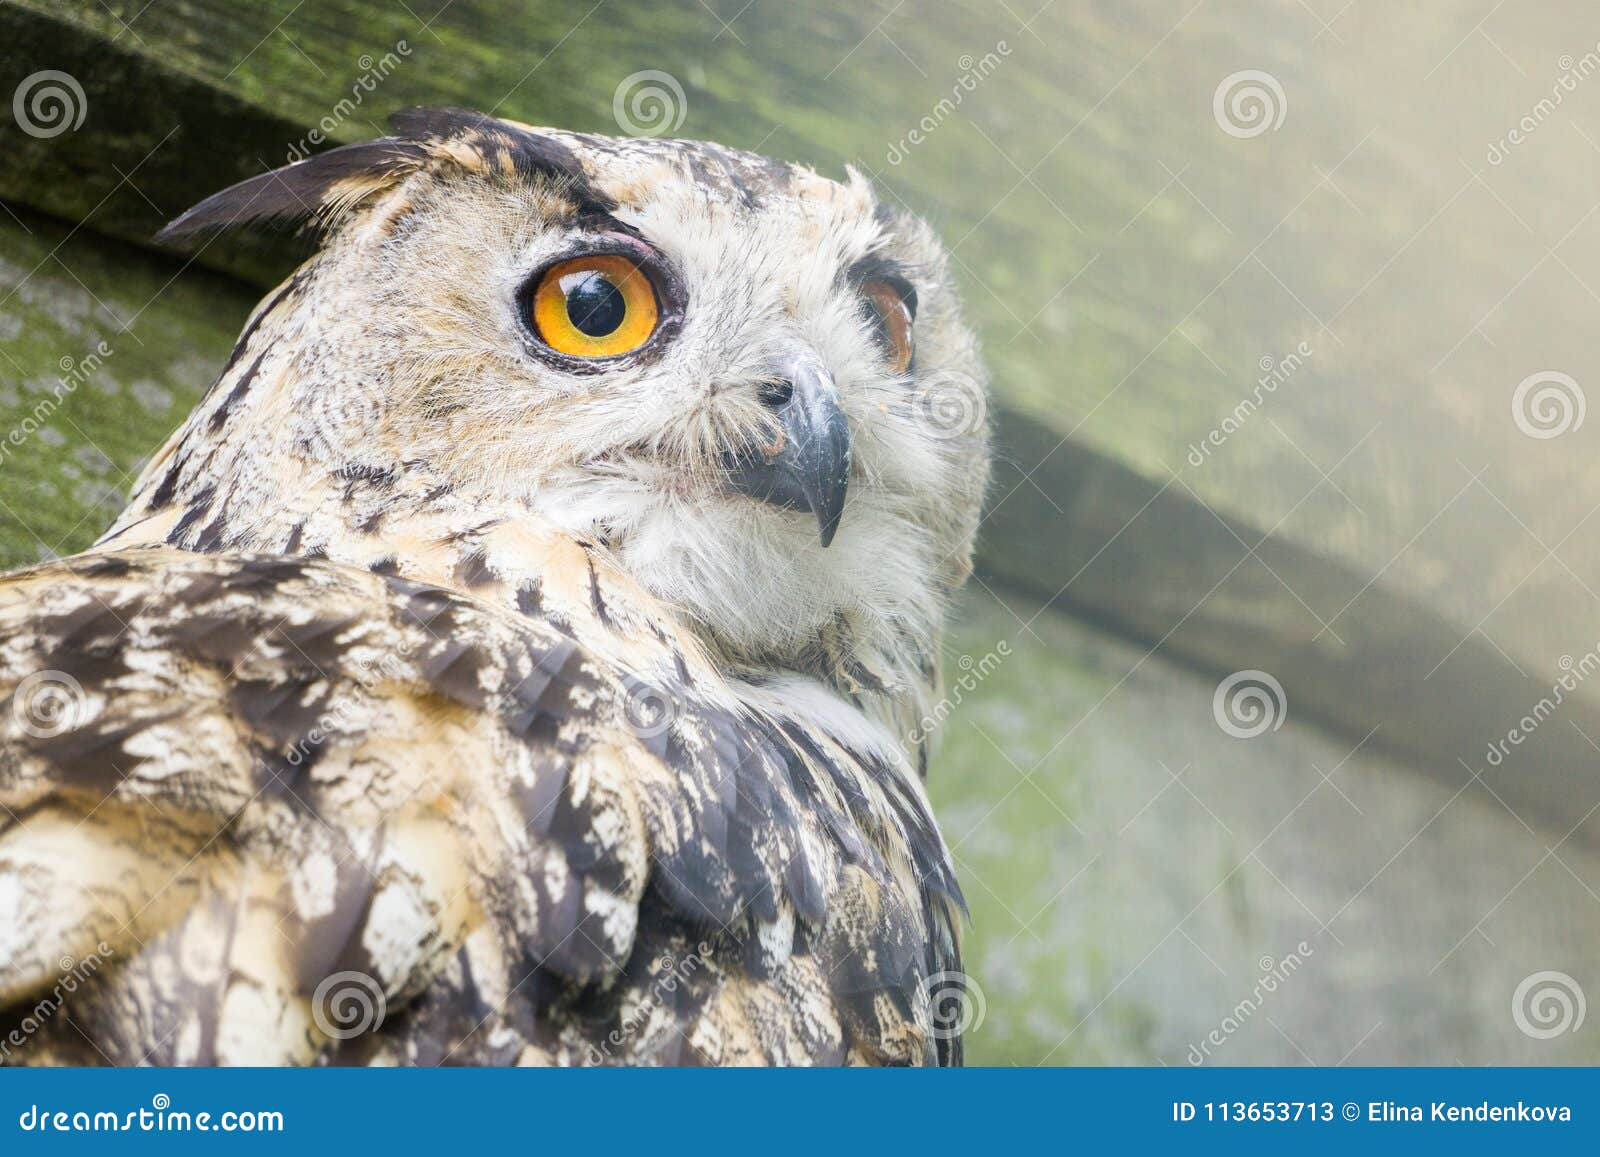 A Big Owl with Ginger Eyes Sitting on a Ledge in Its Wooden House in a ...